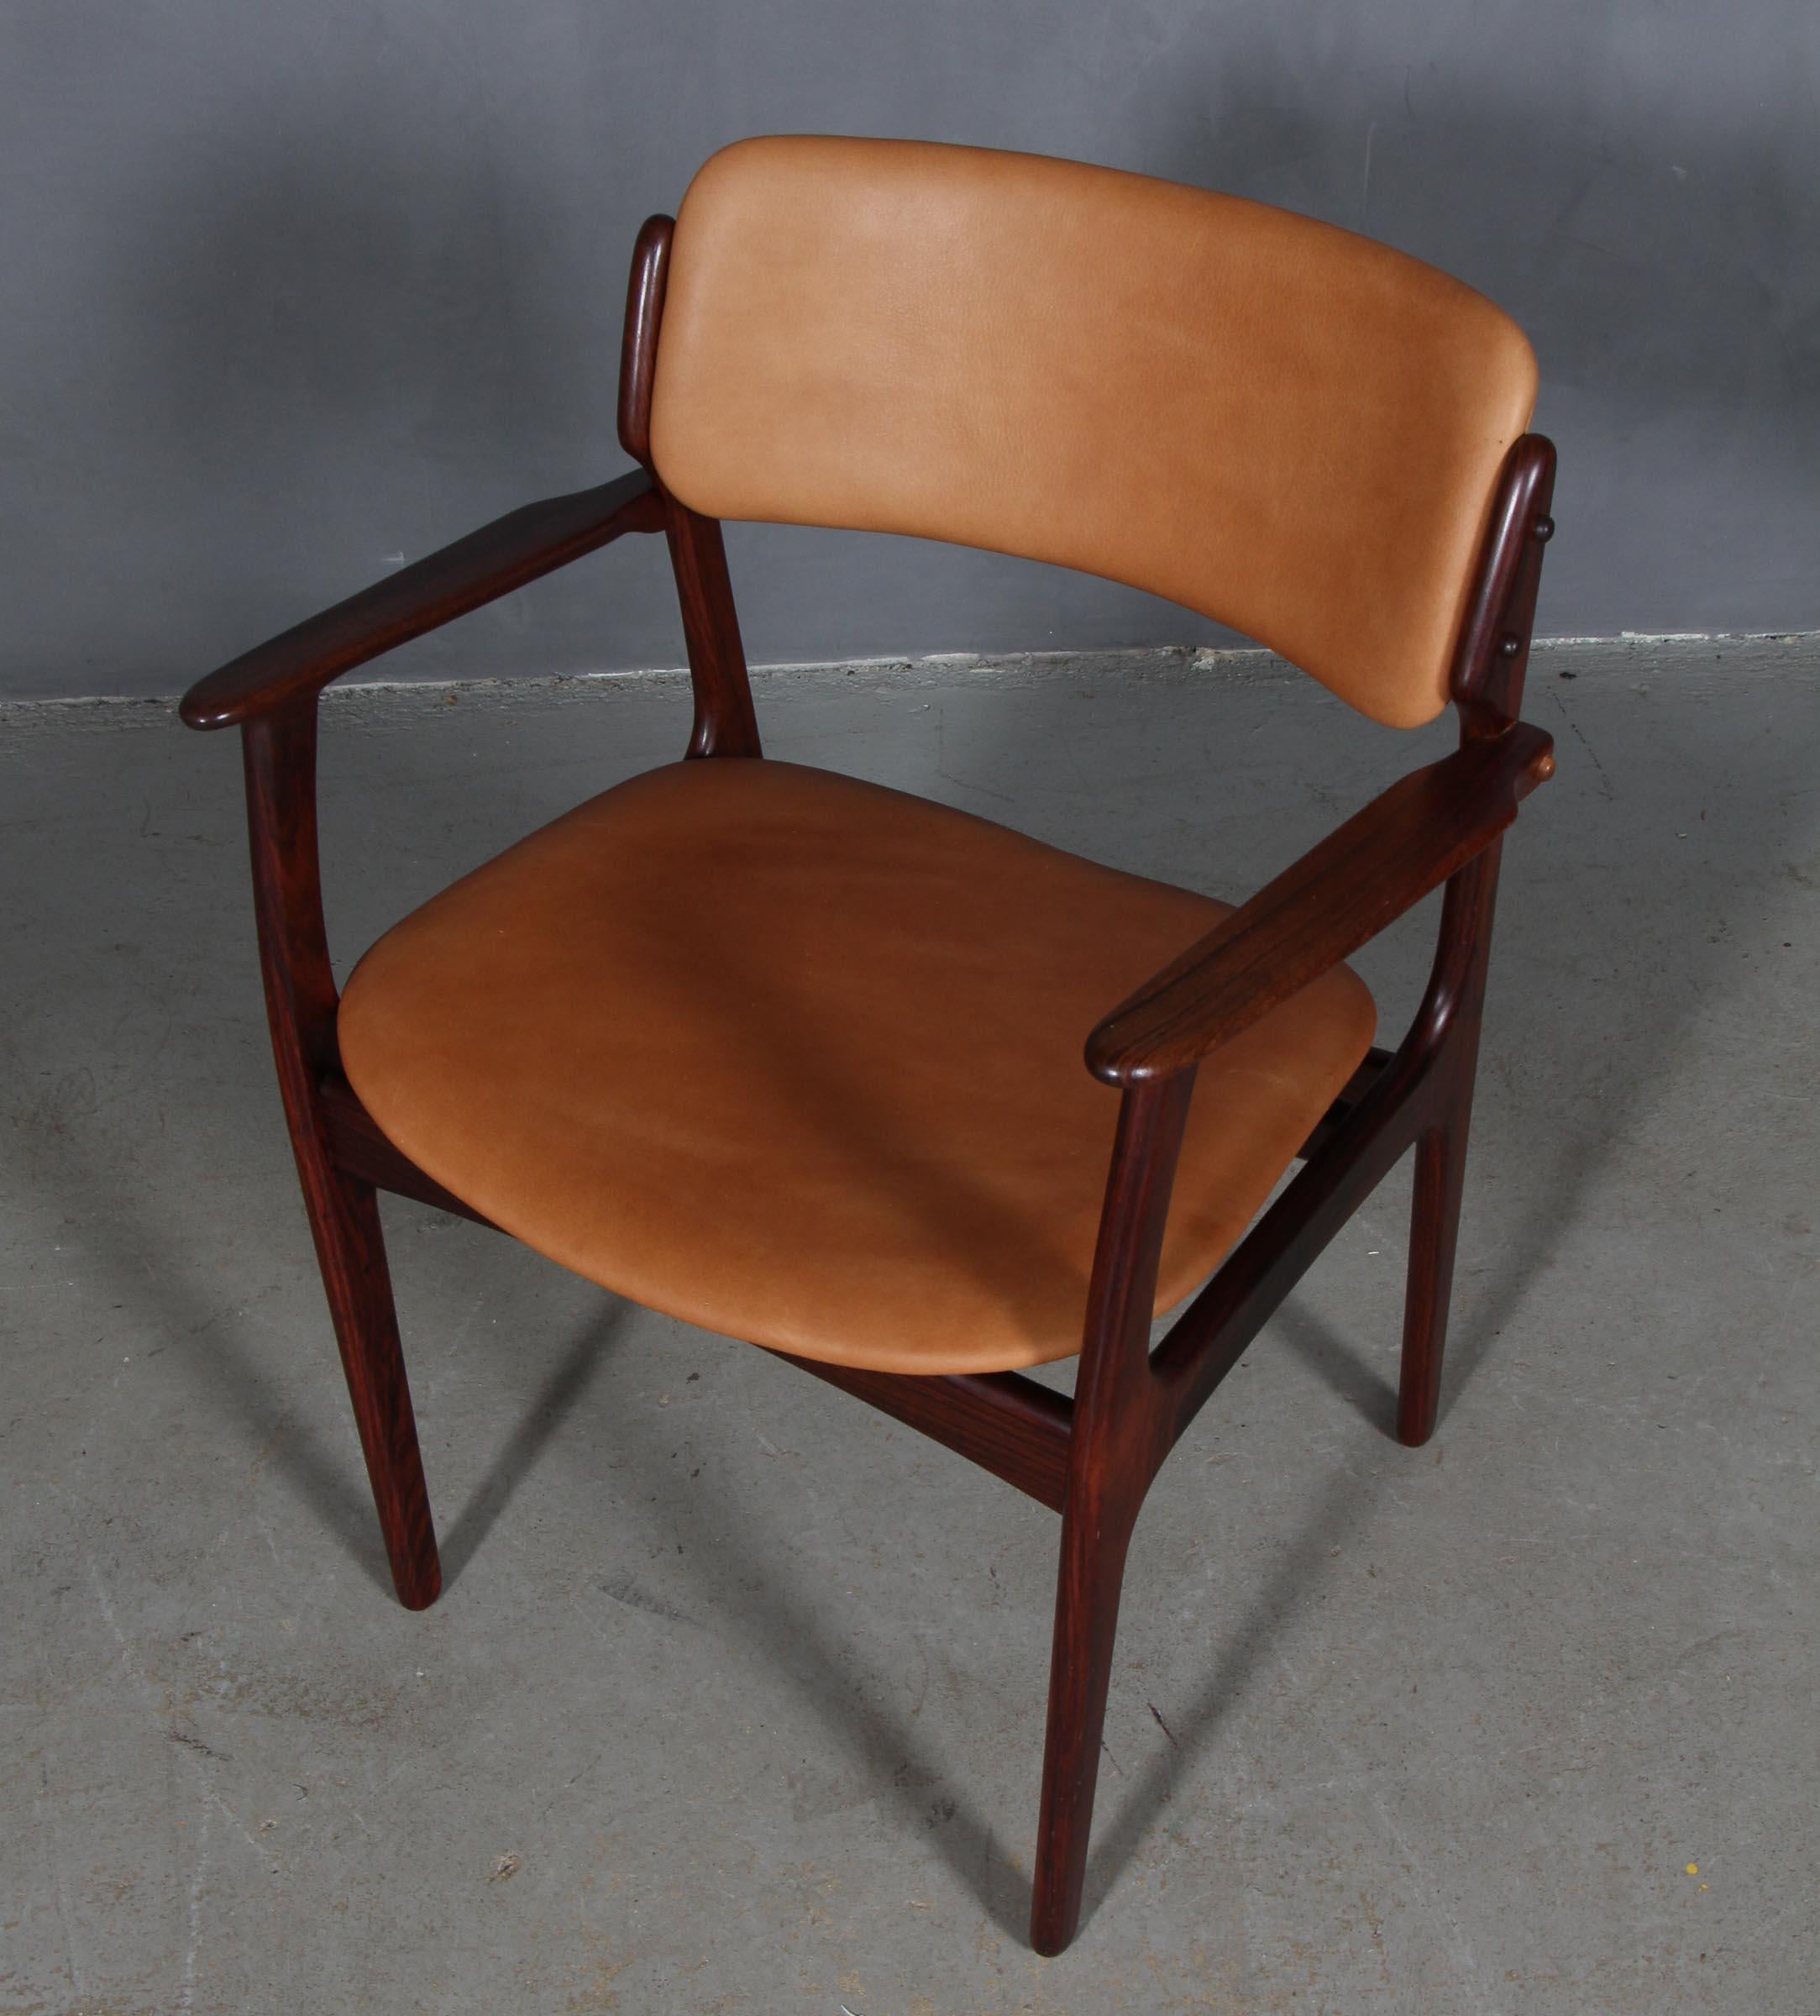 Erik Buch armchair frame of rosewood.

New upholstered with vintage tan aniline leather.

Model 50 made by Odense Maskinsnedkeri, Denmark.